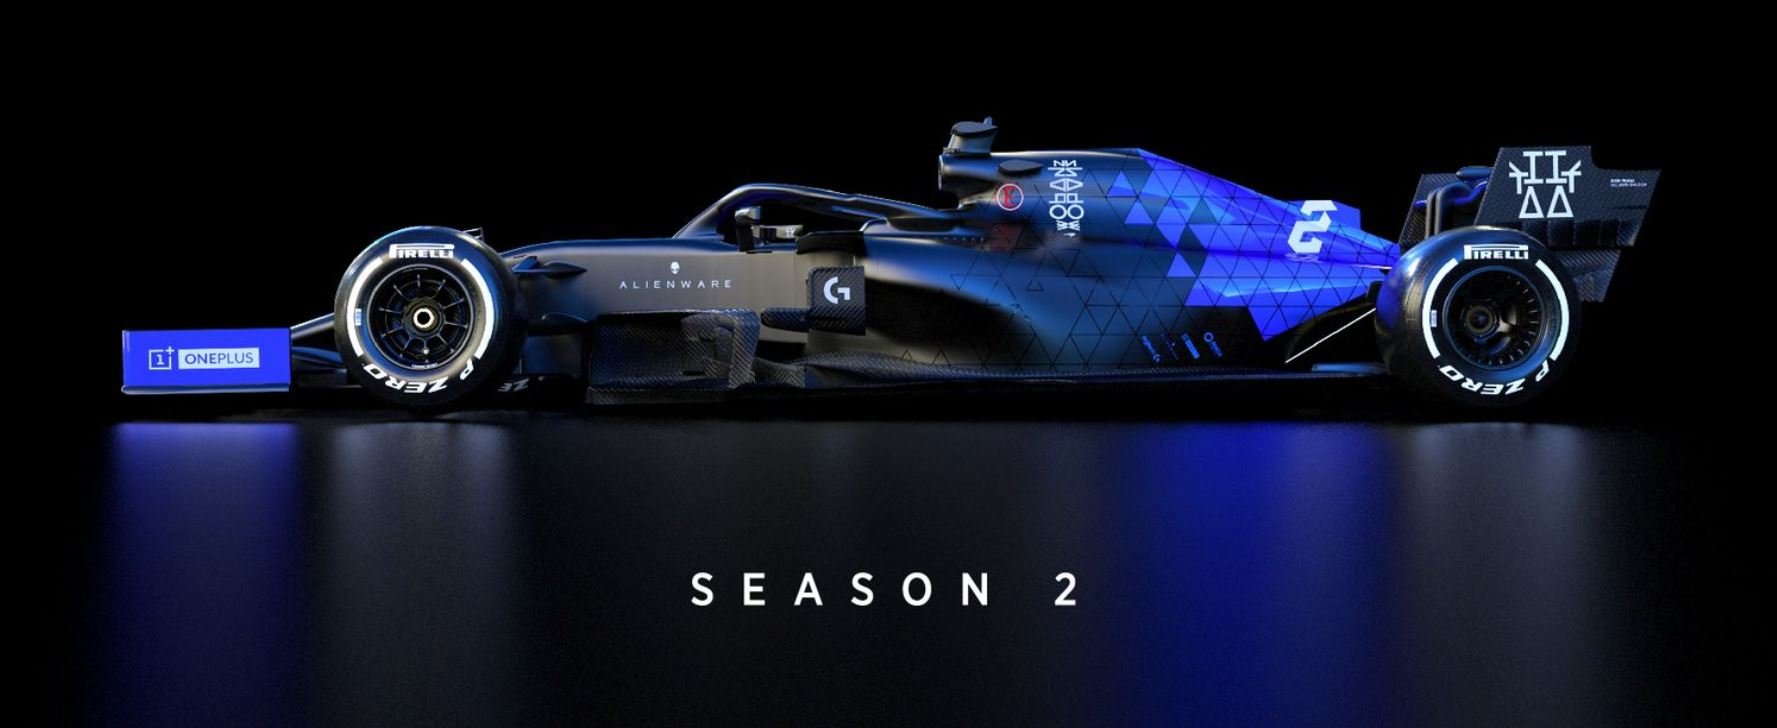 More information about "Annunciato il McLaren Shadow Project season 2"